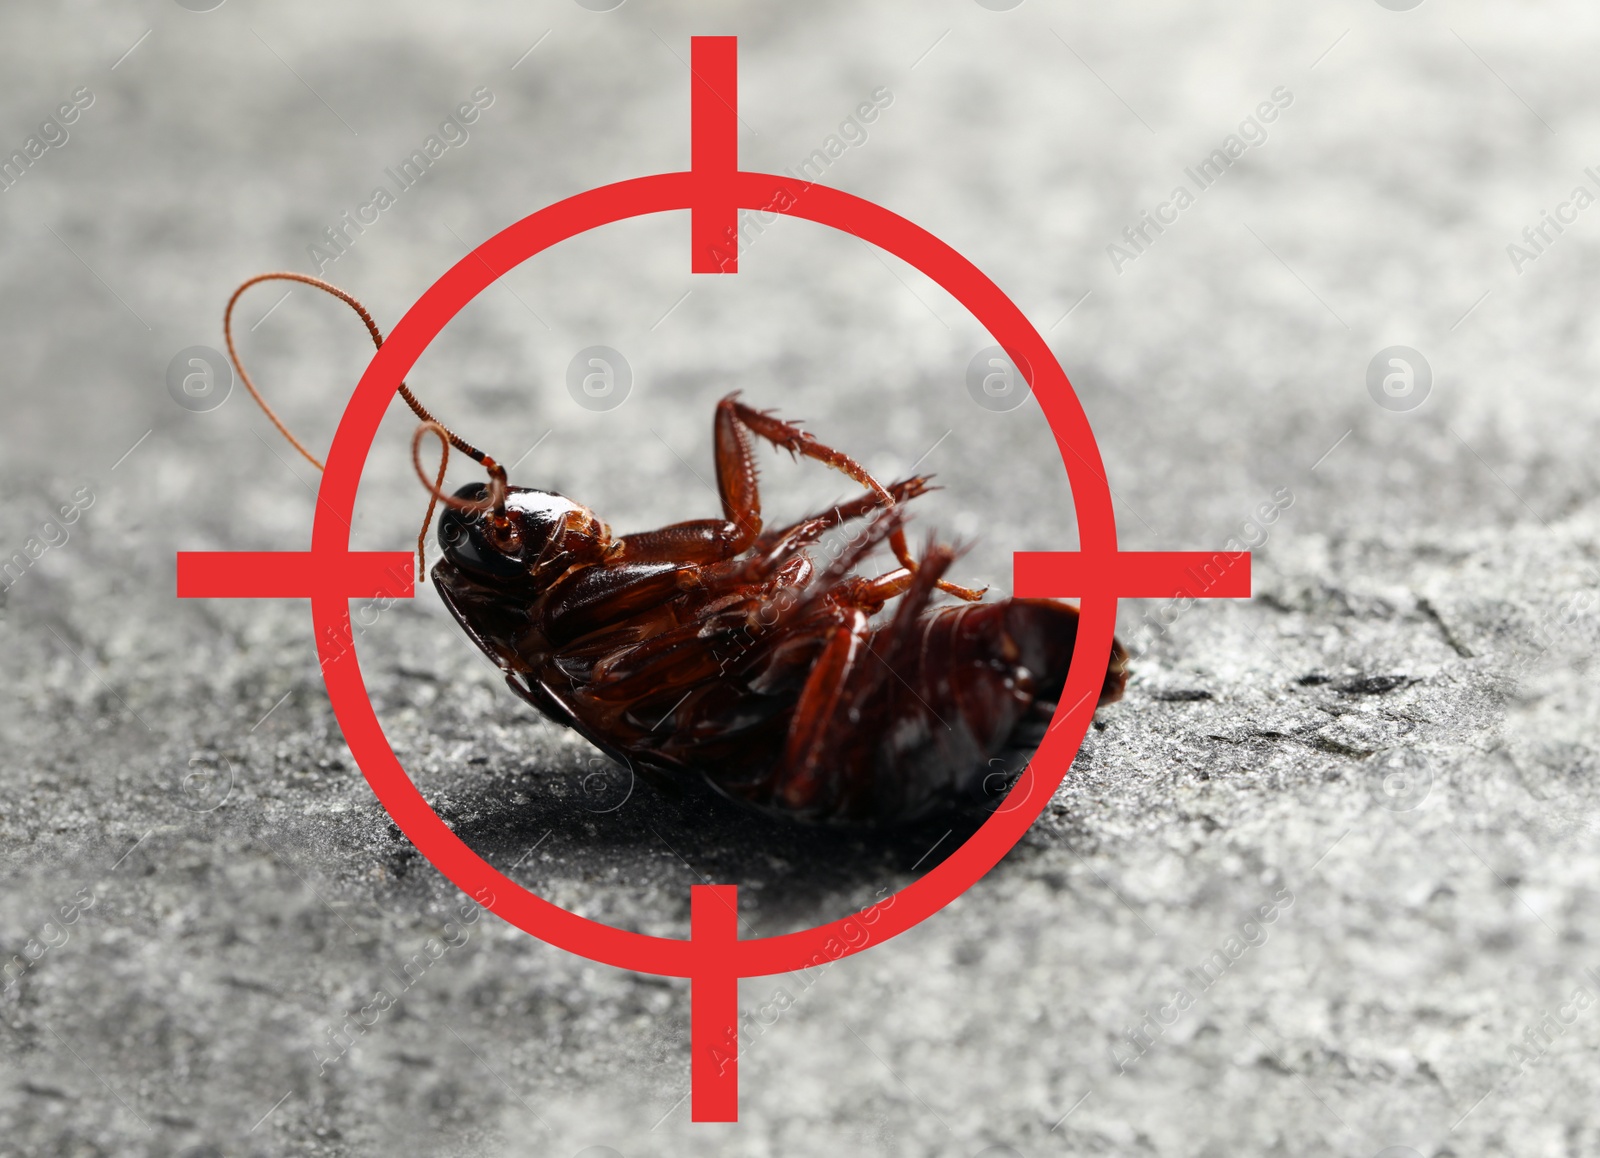 Image of Dead cockroach with red target symbol on grey surface. Pest control